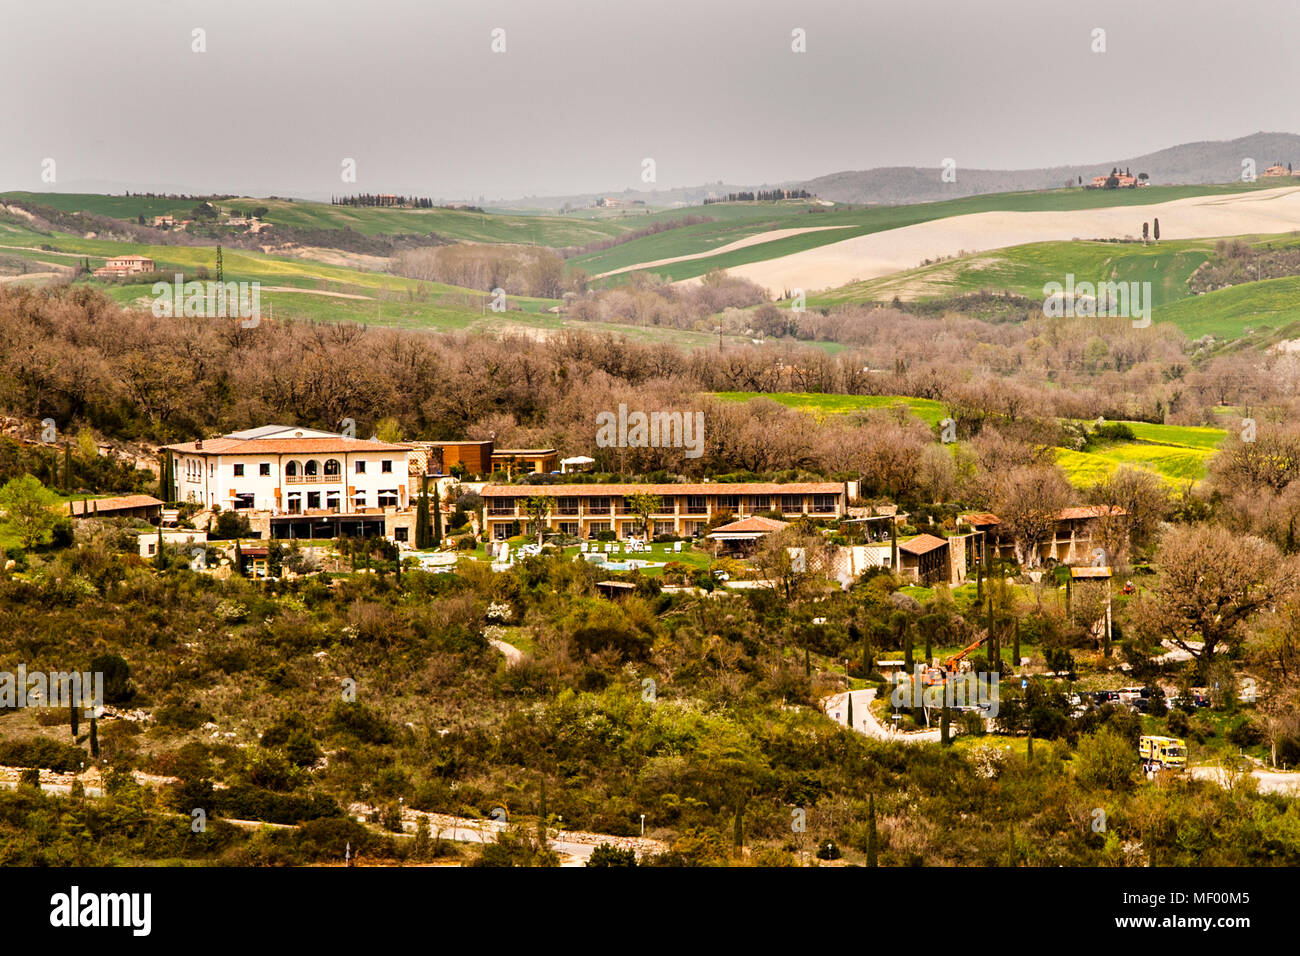 Tuscan landscape in spring, green fields, cypreses and olive trees, hiking in Tuscany, Val d'orcia Italy, UNESCO World Heritage. The Hotel dler Thermae blends unobtrusively into the landscape Stock Photo